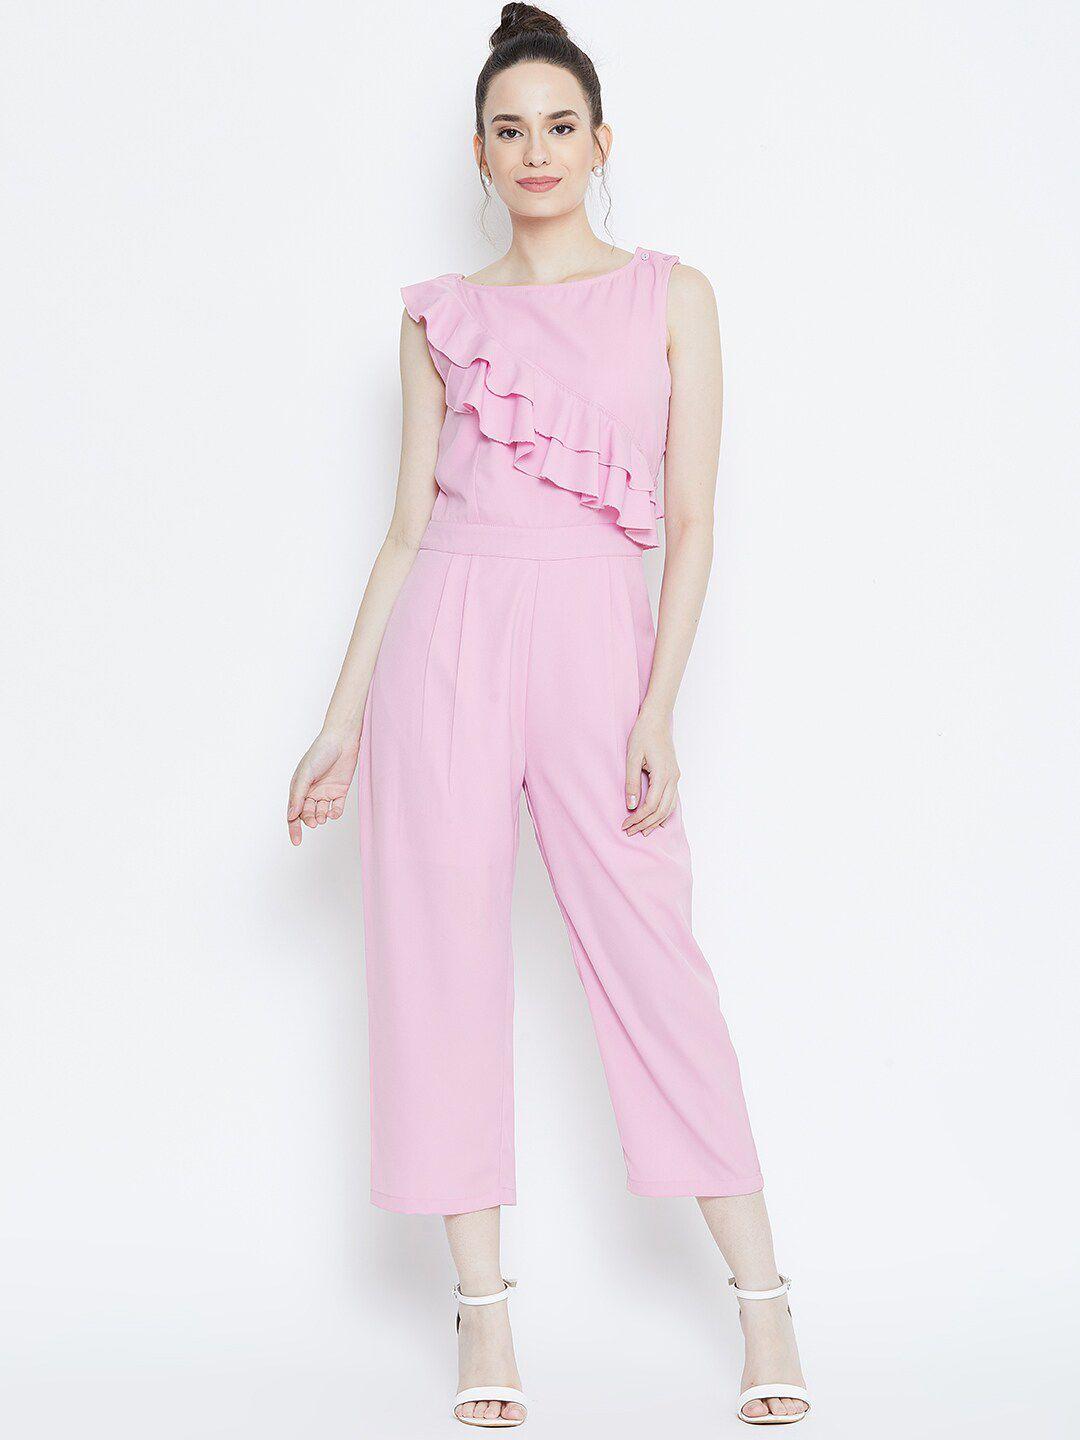 dodo & moa pink culotte jumpsuit with ruffles